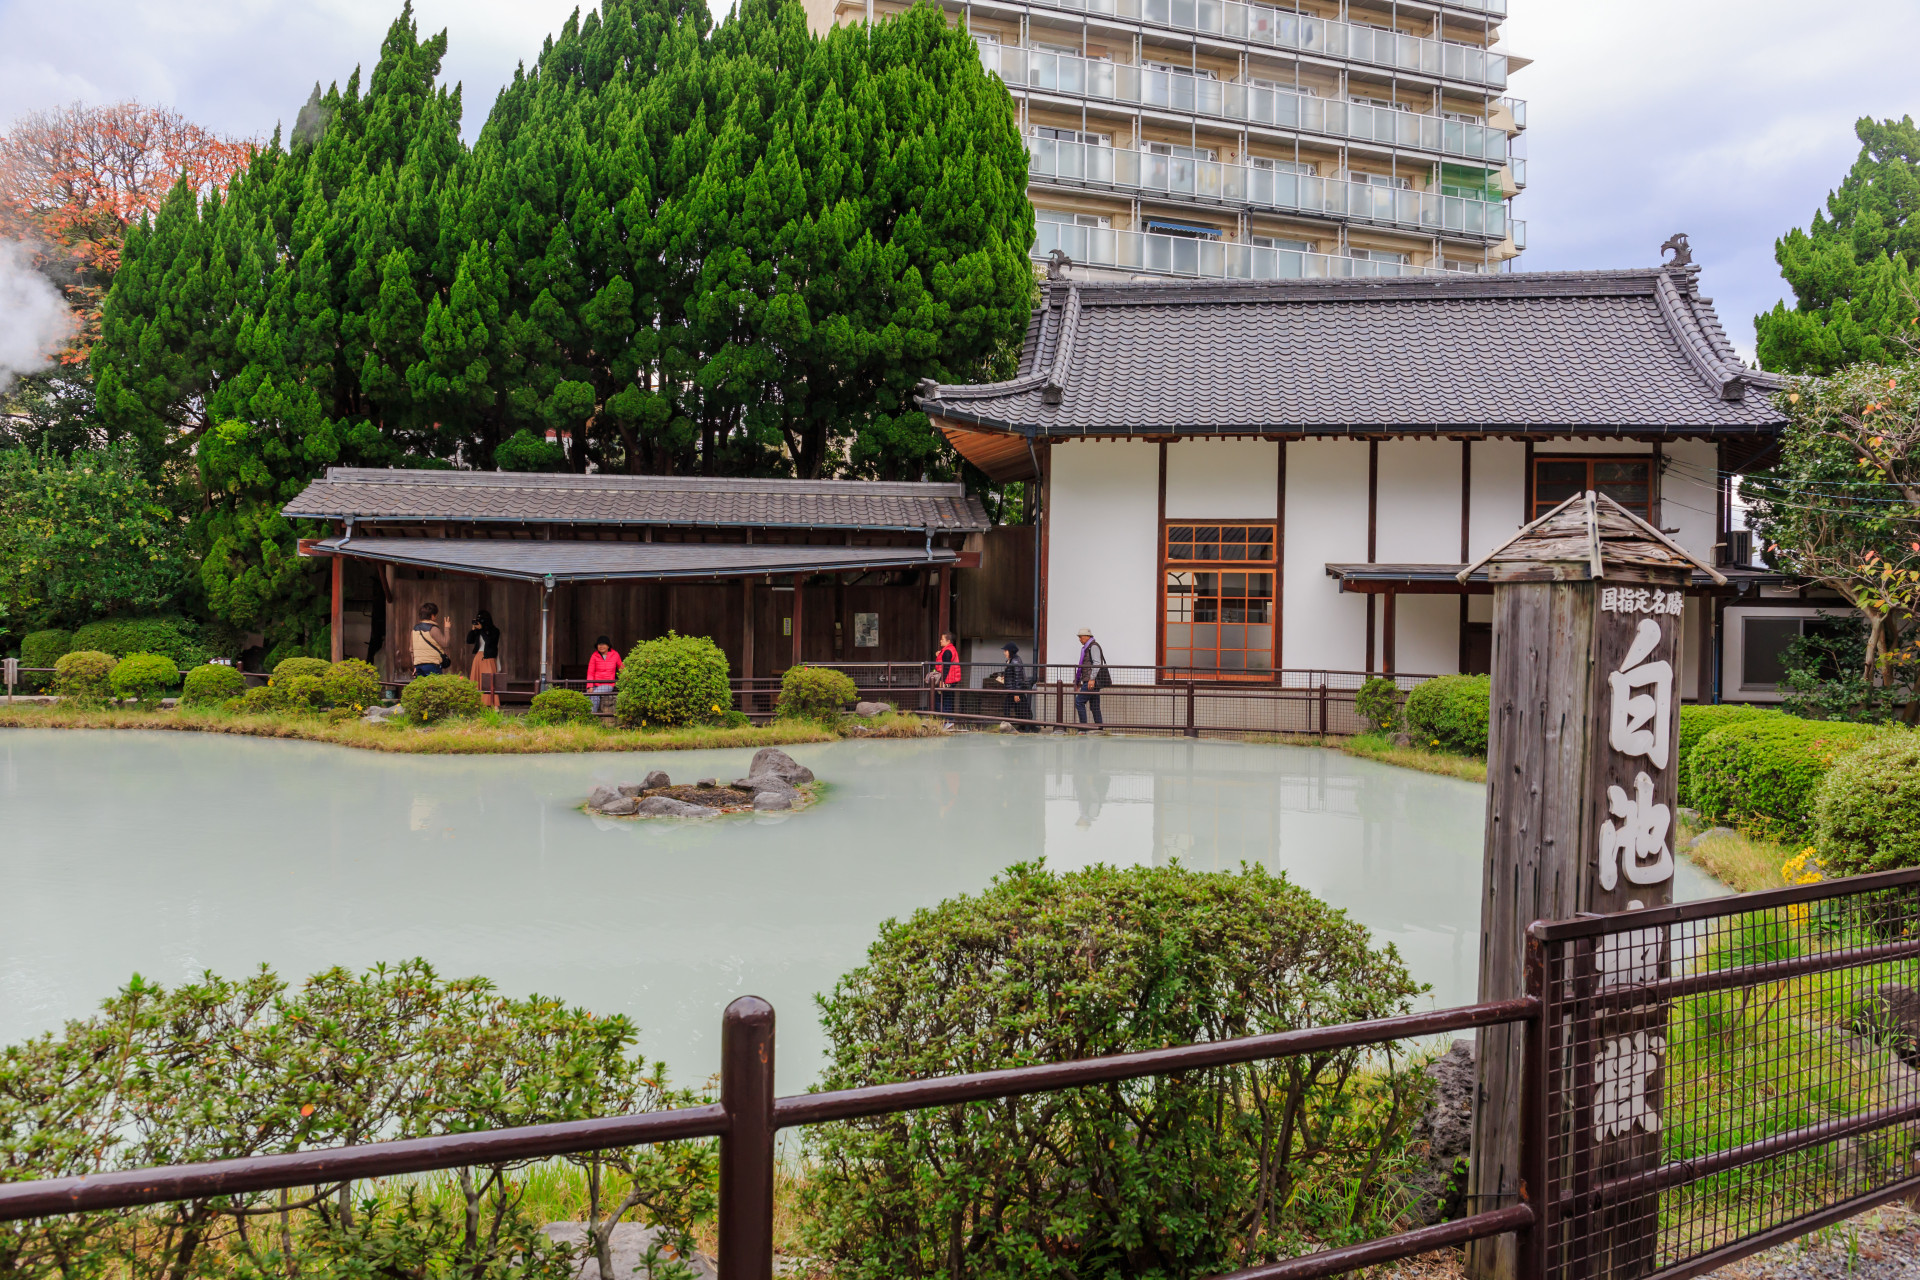 Shiraike Jigoku means 'white pond hell' and is surrounded by a typical Japanese garden.